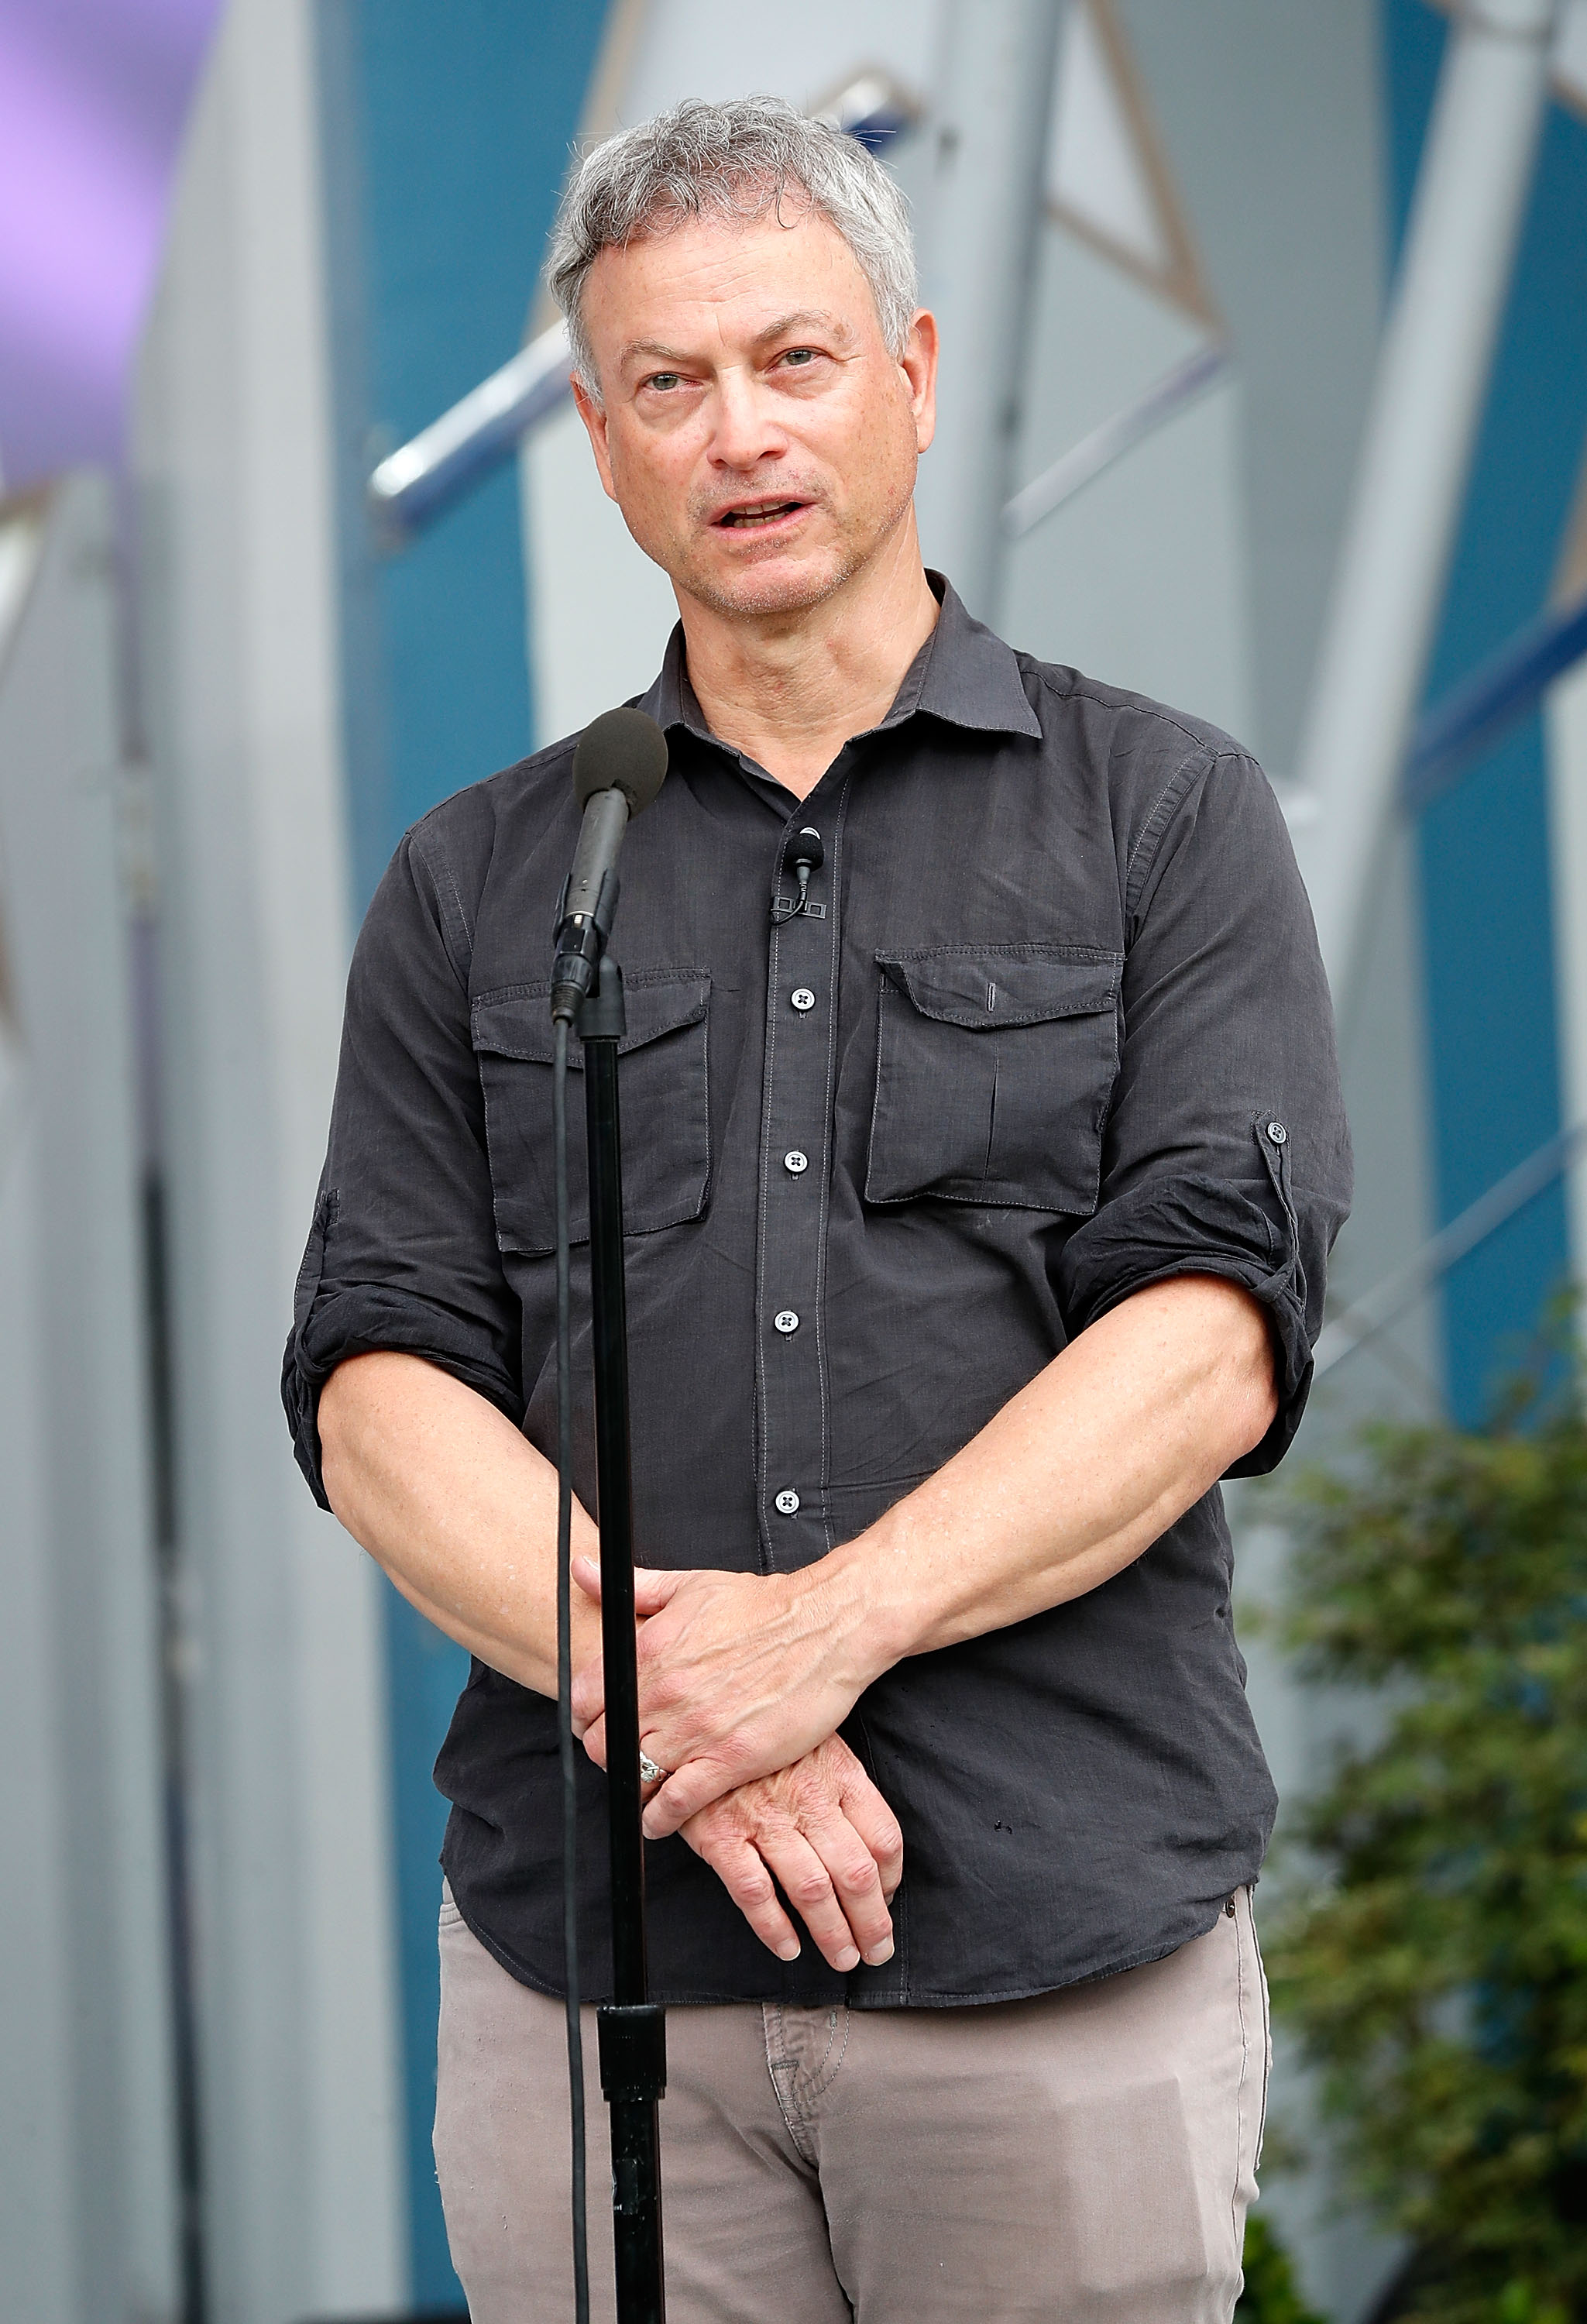 Gary Sinise speaks during the National Memorial Day Concert - Rehearsal at the U.S. Capitol, West Lawn, in Washington, DC, on May 26, 2018. | Source: Getty Images